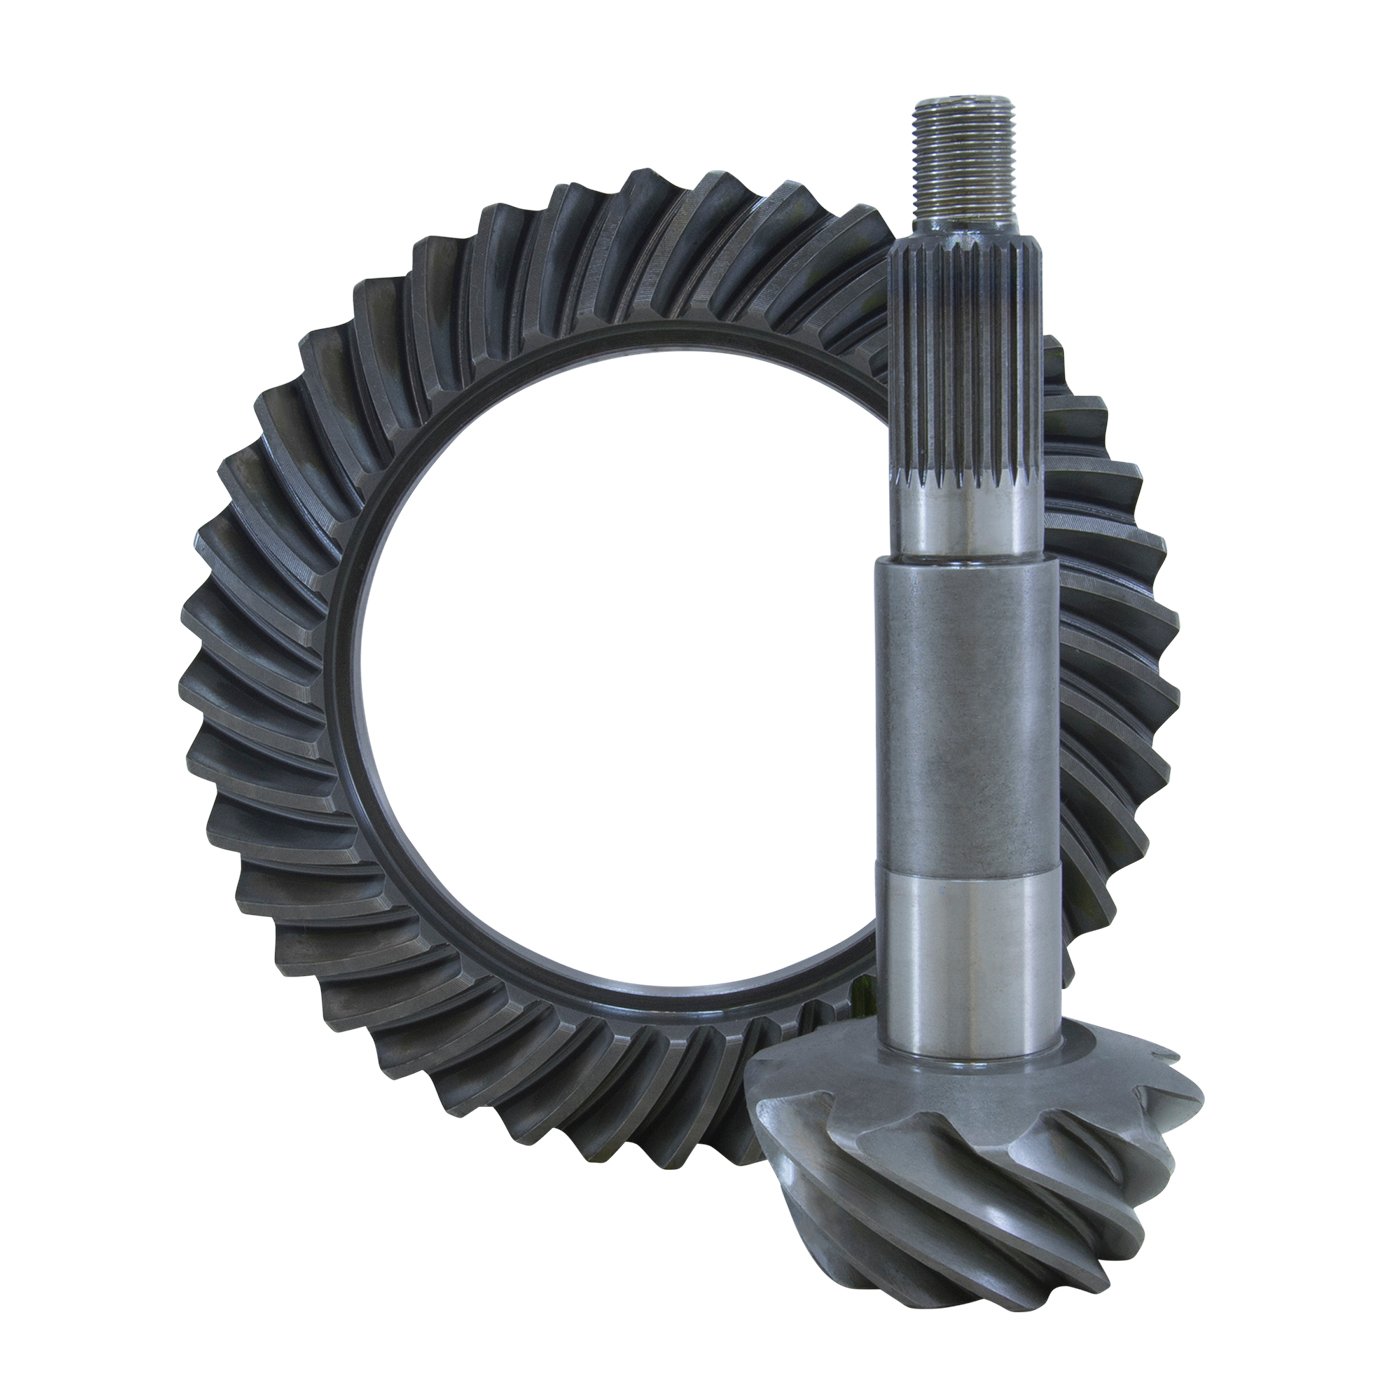 USA Standard ZG D44-513T Replacement Ring & Pinion Thick Gear Set, For Dana 44, 5.13 Ratio